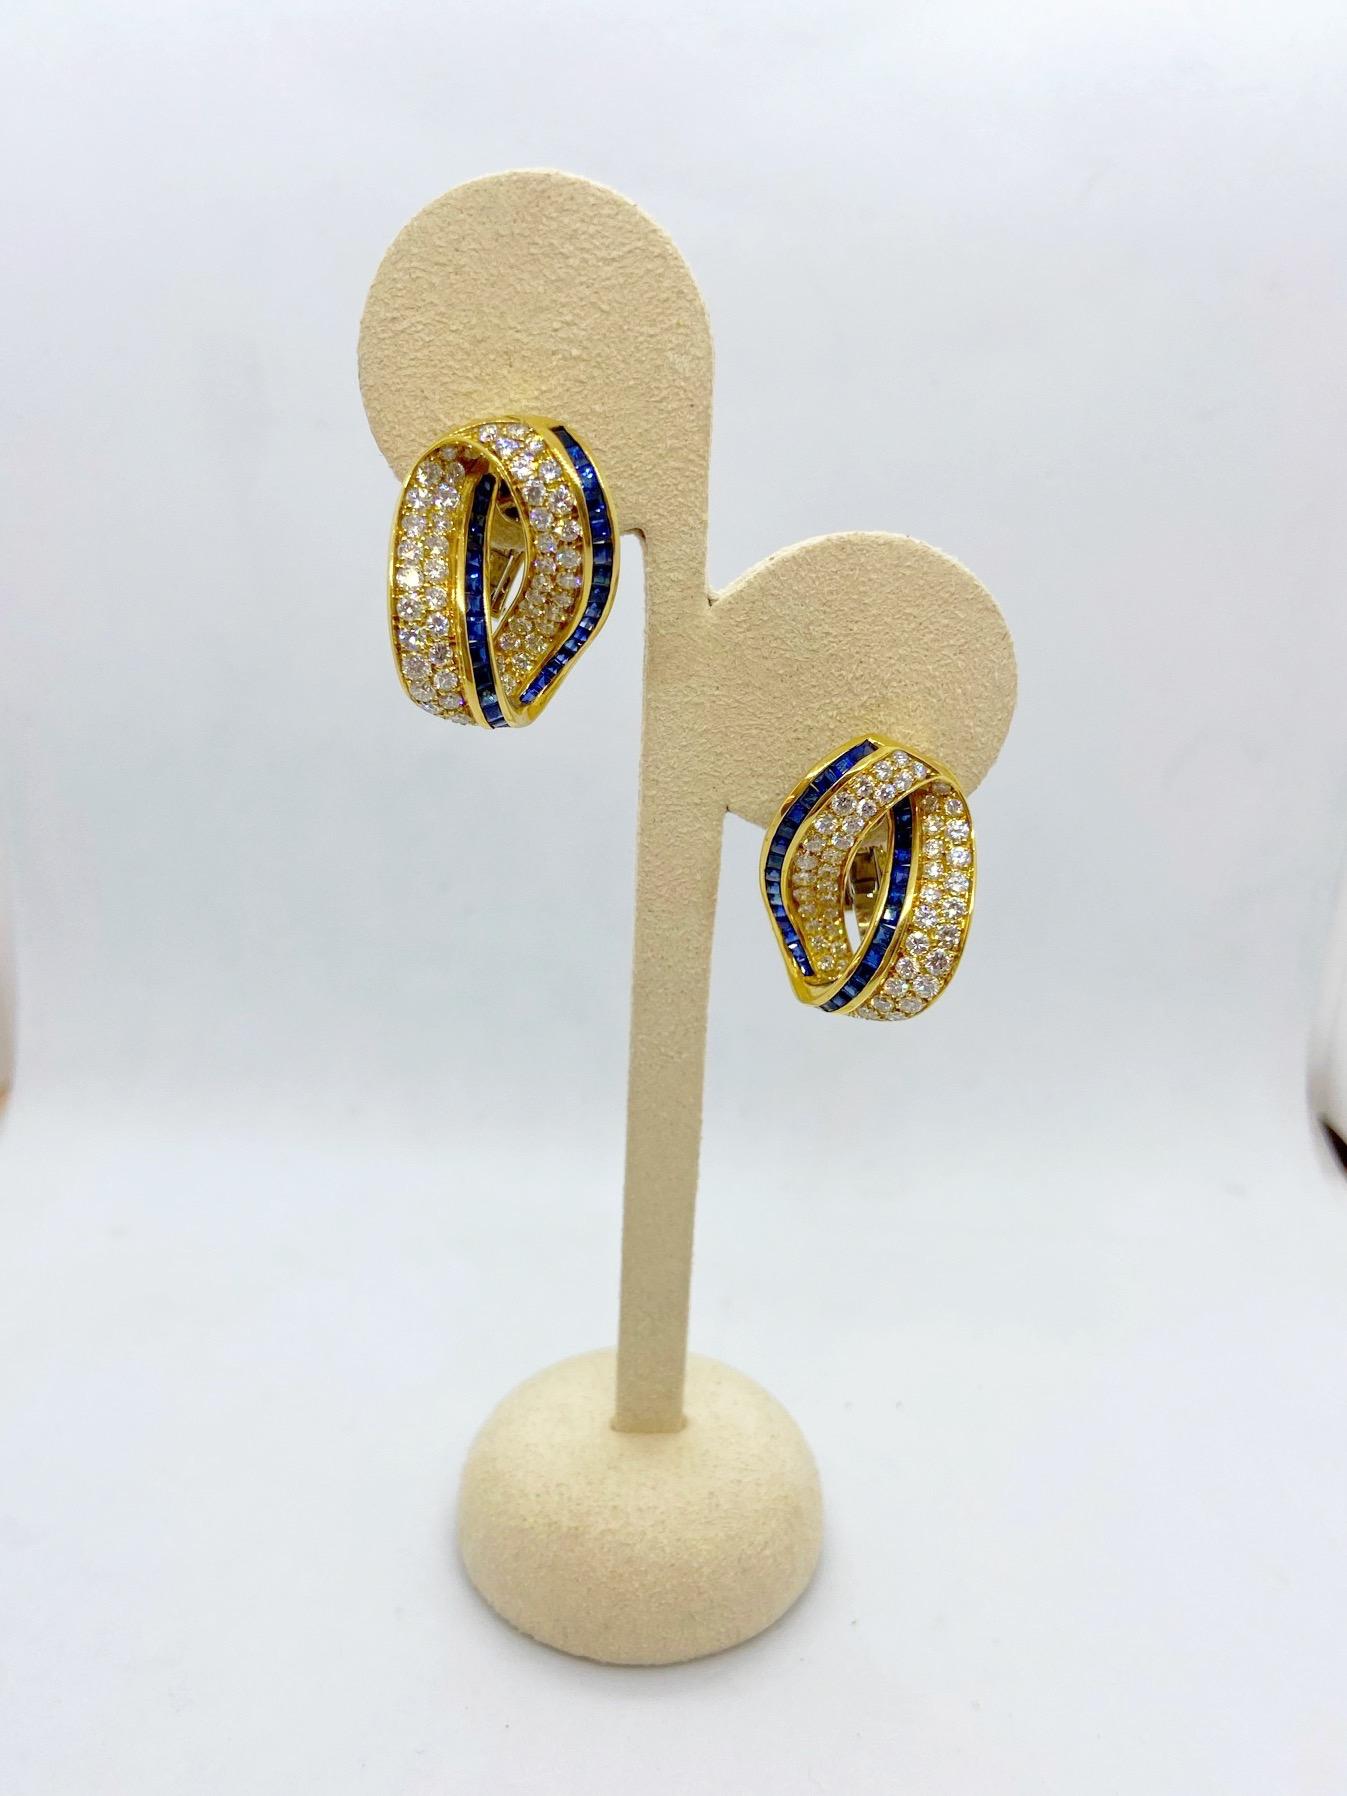 18 karat yellow gold earrings designed as an infinity knot. The earrings have been beautifully set with round brilliant diamonds and square cut blue sapphires. They have a post/clip back, and measure approximately 1